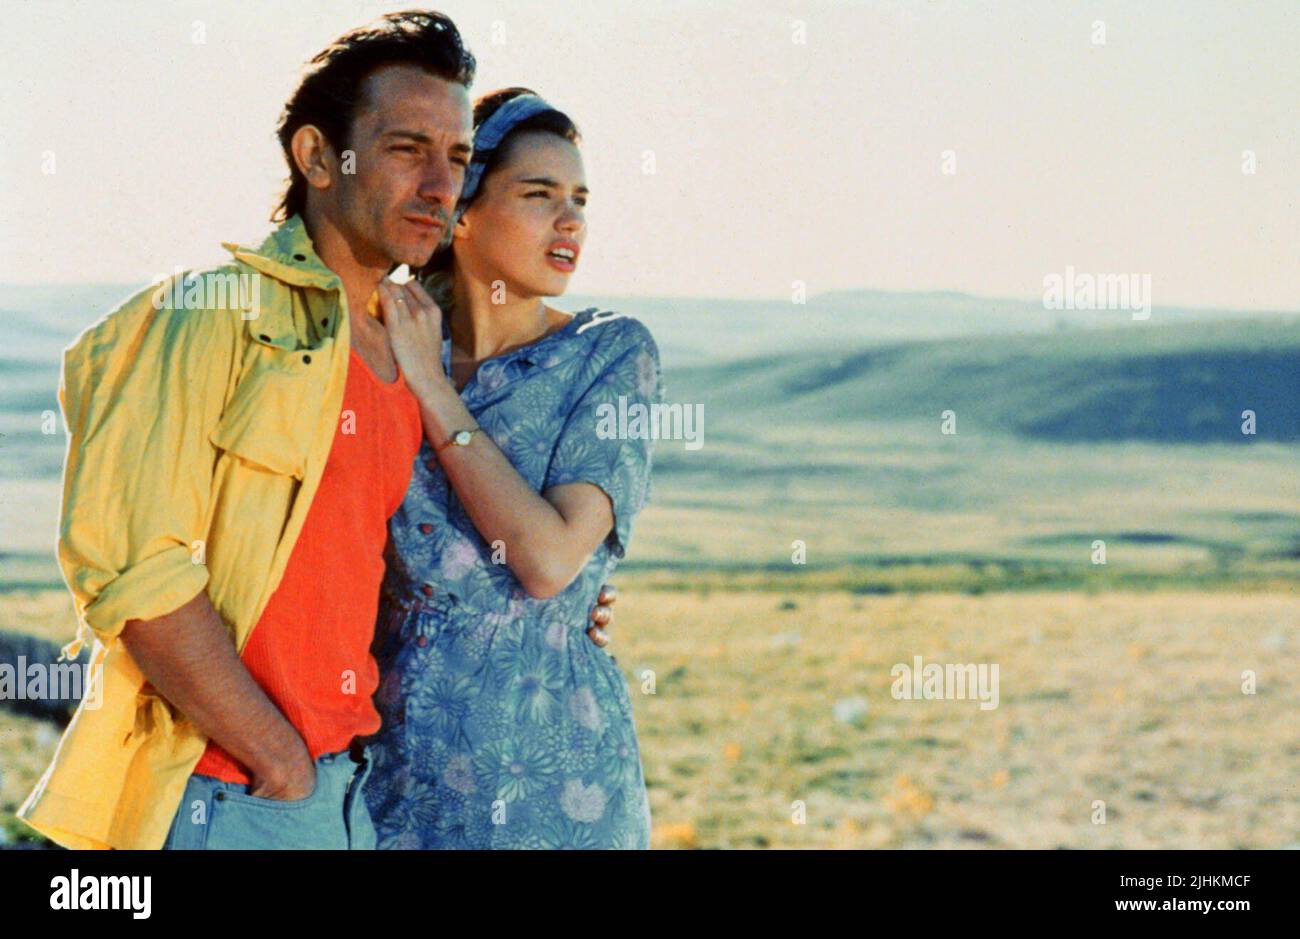 JEAN-HUGUES ANGLADE, BEATRICE DALLE, BETTY BLUE, 1986 Stock Photo